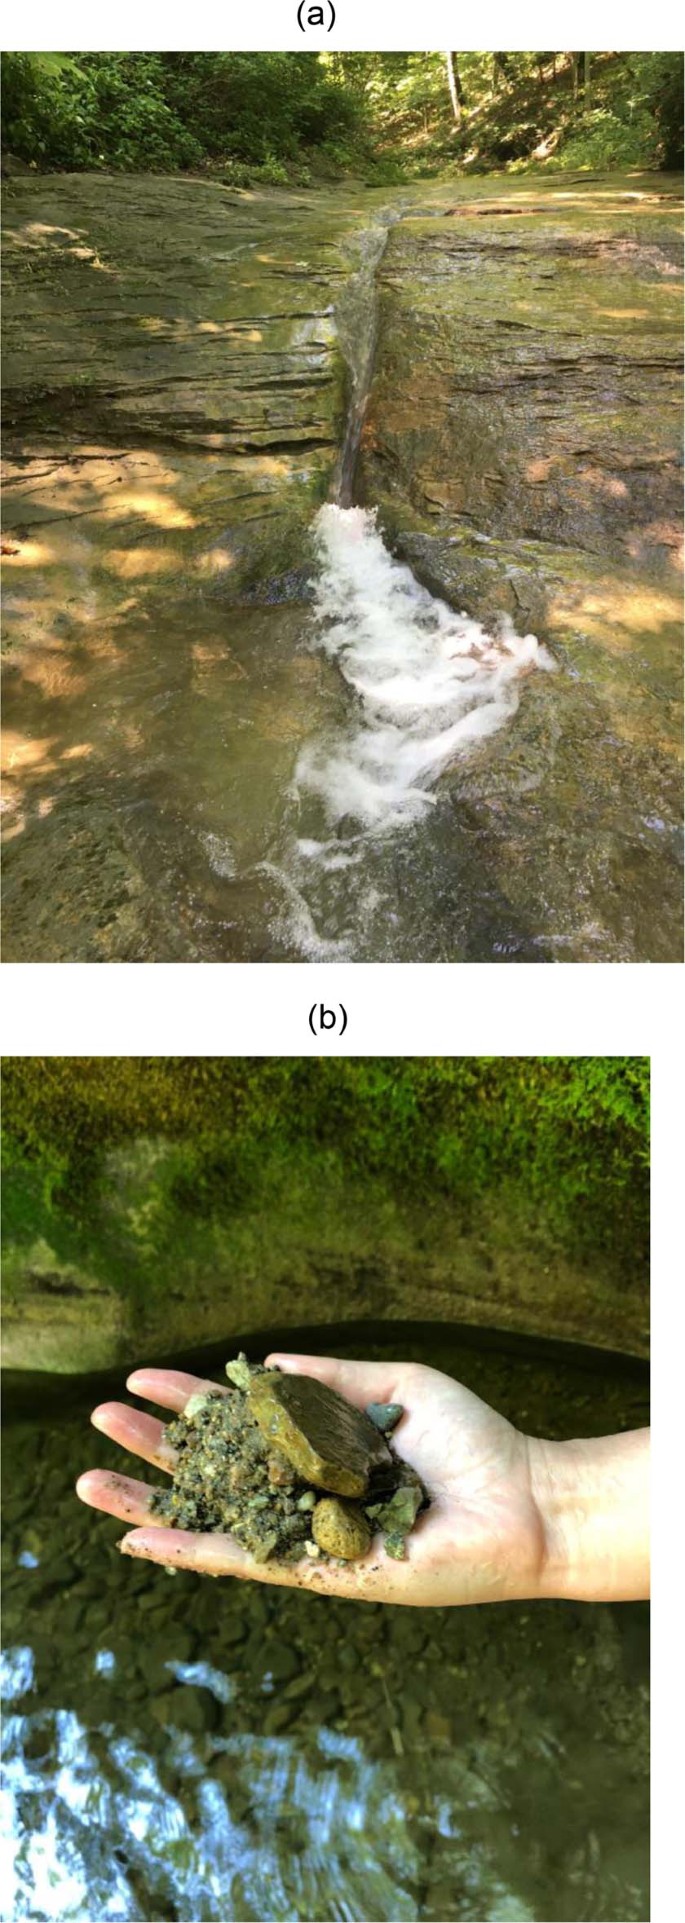 Bedrock-alluvial streams with knickpoint and plunge pool that migrate  upstream with permanent form | Scientific Reports